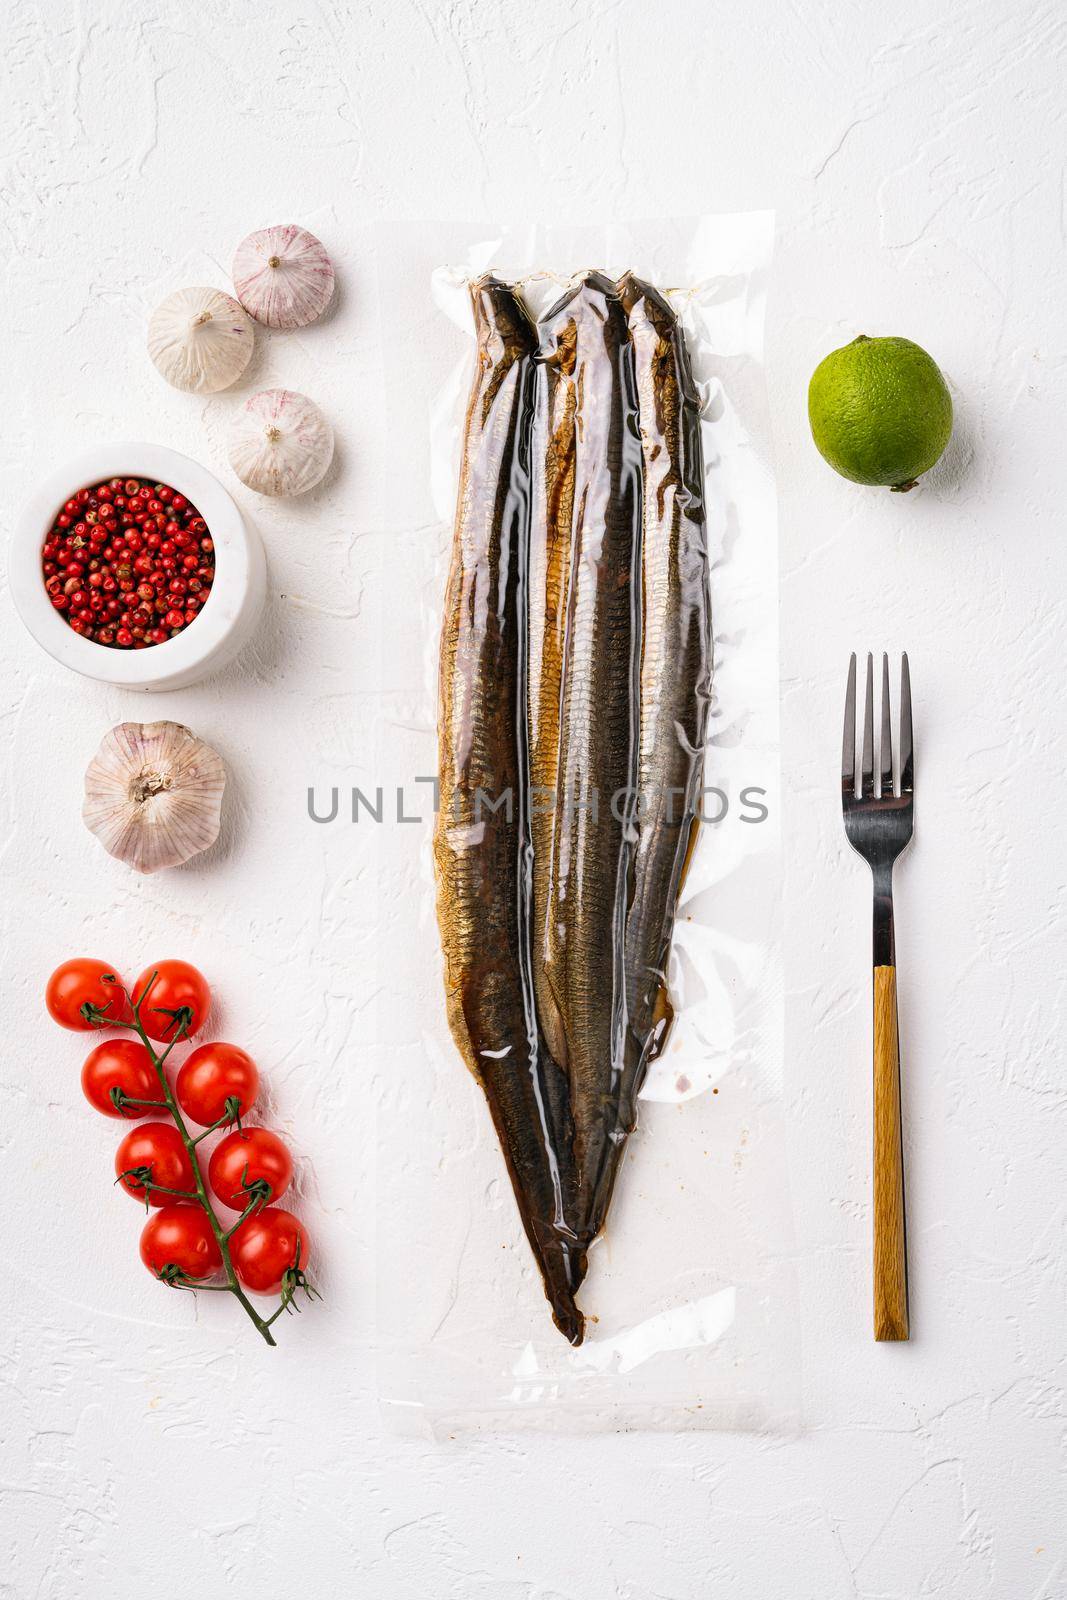 Smoked Lamprey seafood delicacy vacuum pack set, on white stone table background, top view flat lay